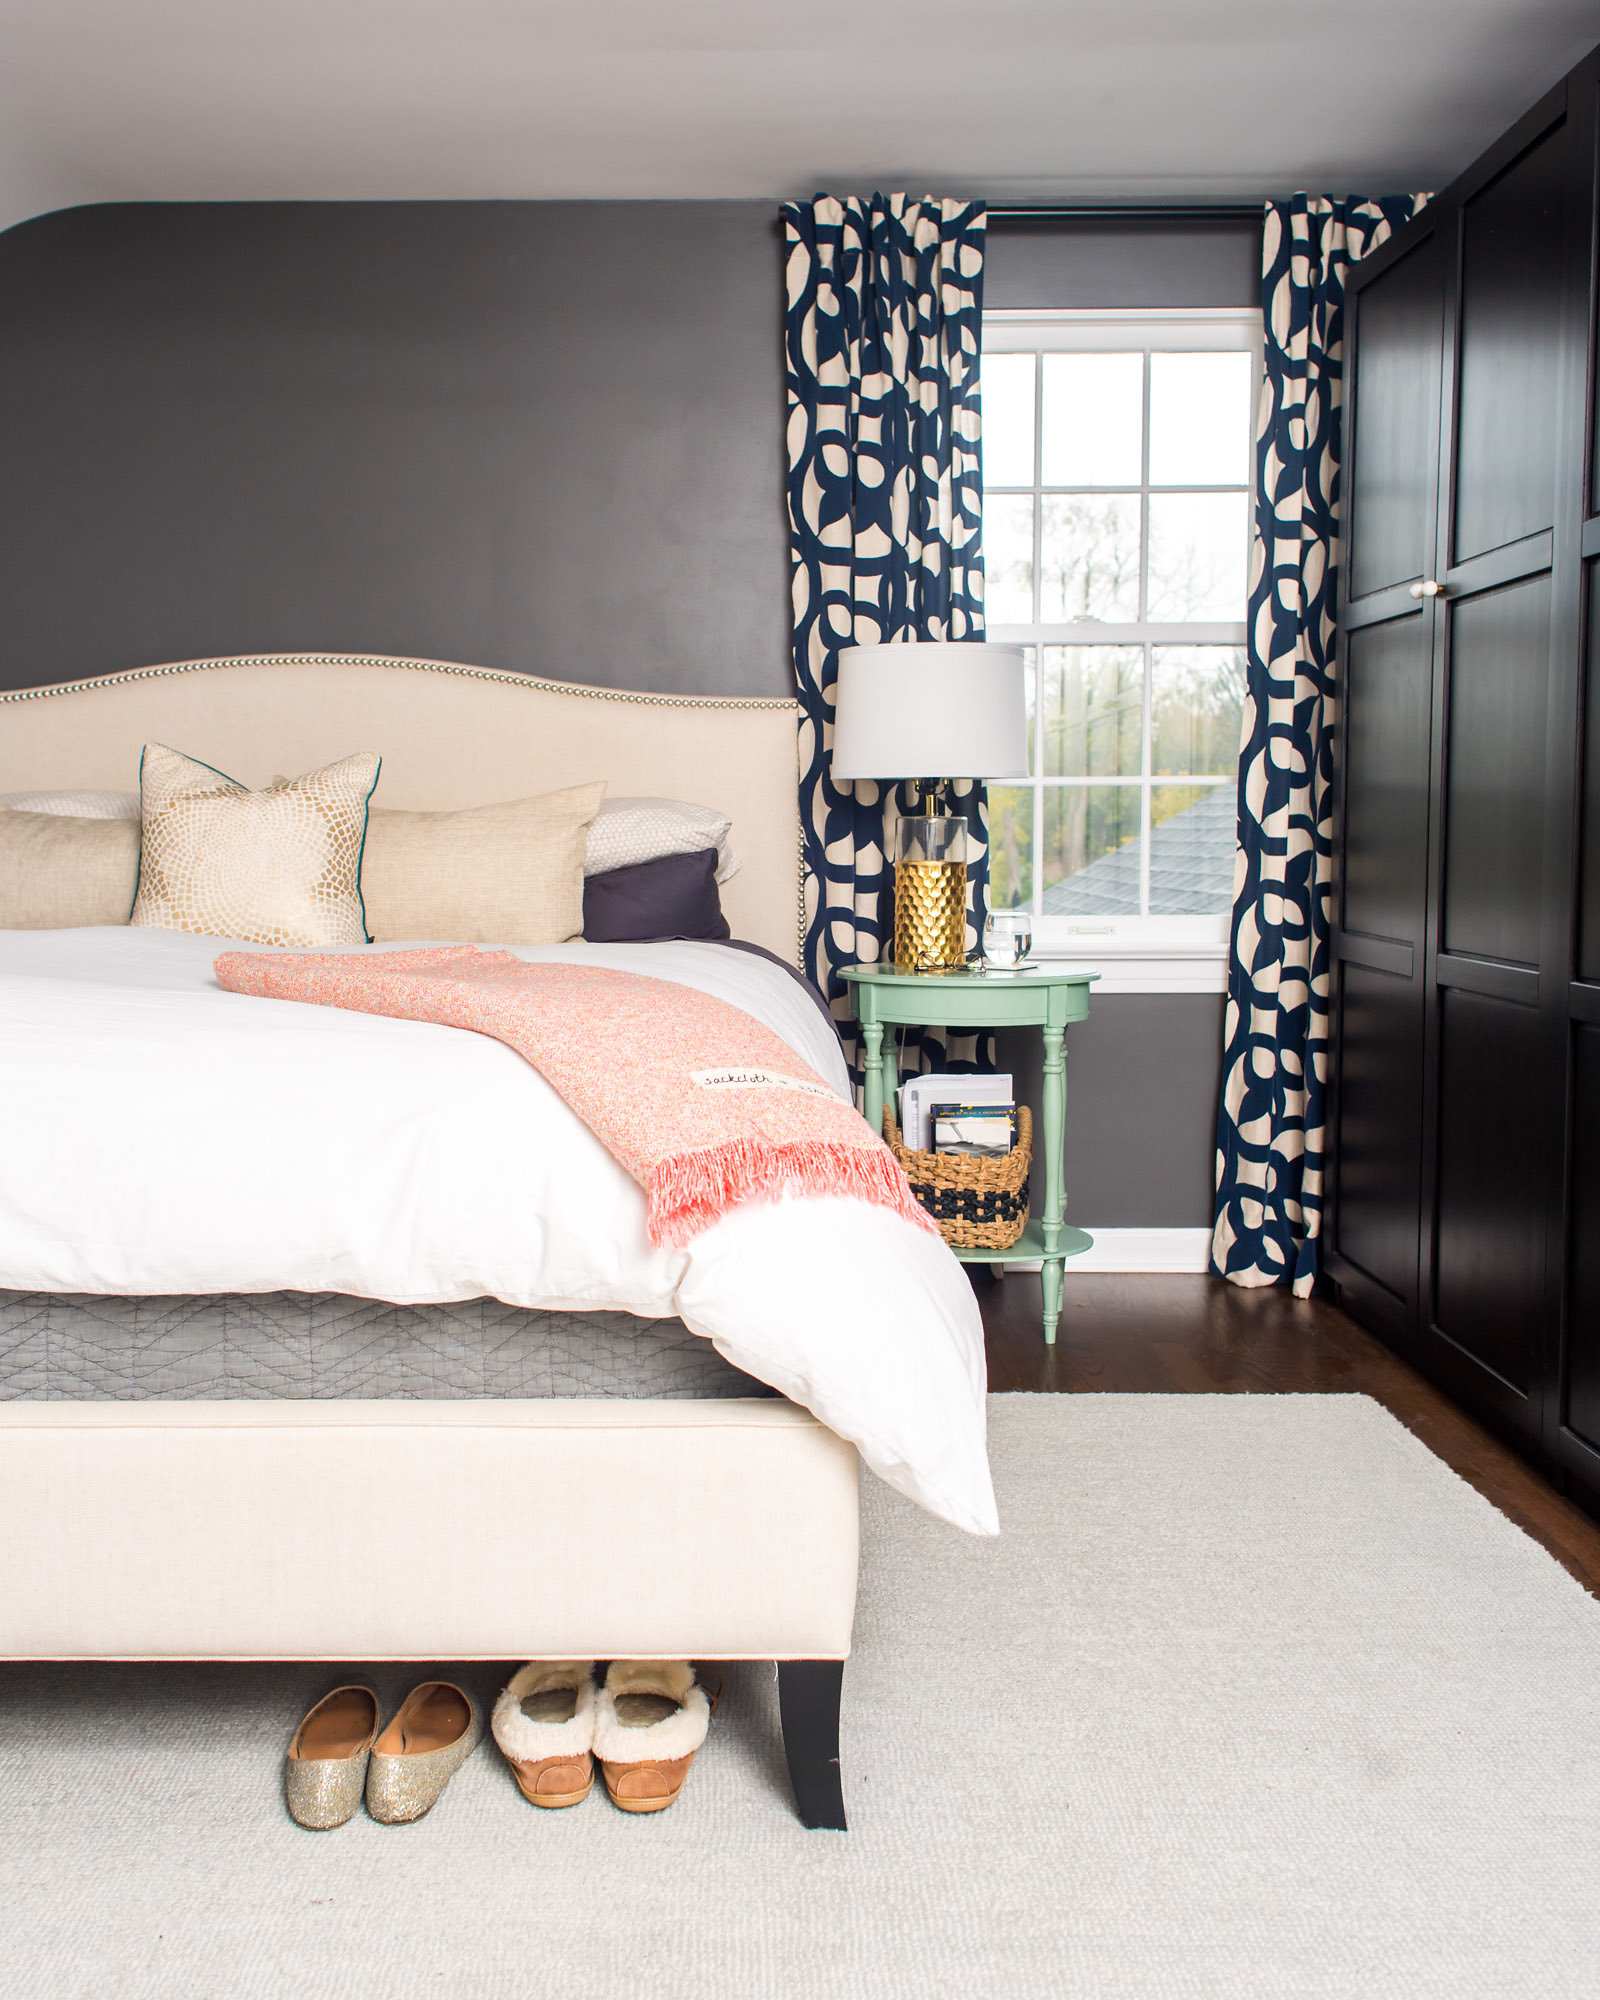 MMDH: Before & After Bedrooms